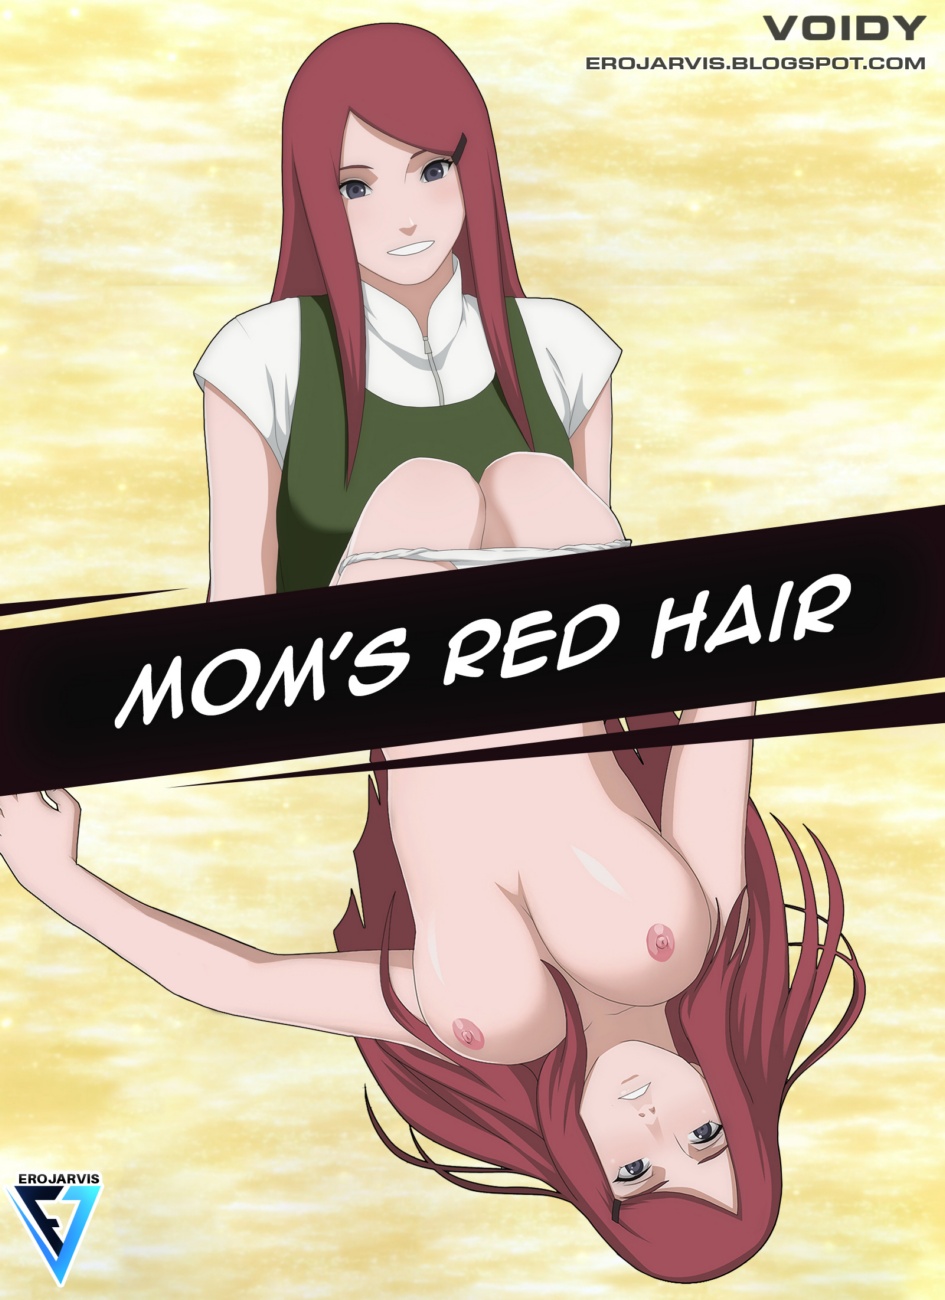 [Voidy] MOM'S RED HAIR [Chinese] [超能汉化组] [Voidy] MOM'S RED HAIR [超能汉化组]